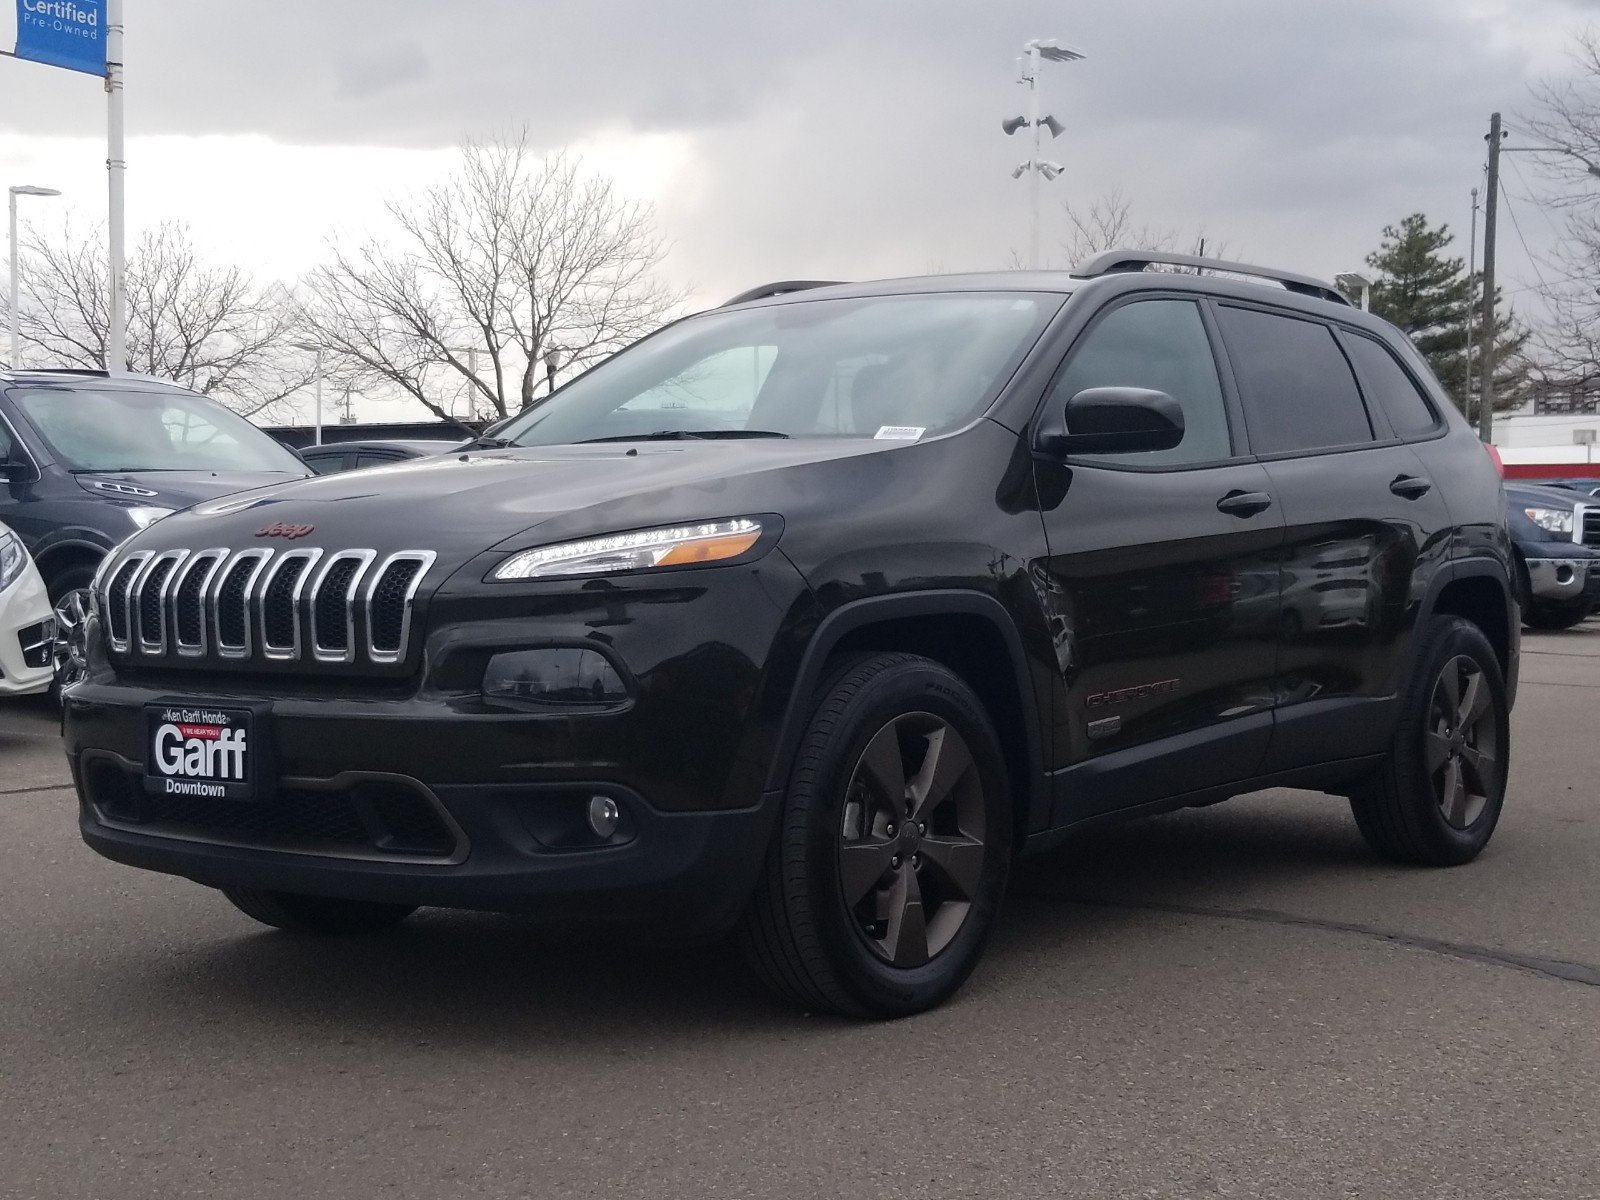 PreOwned 2017 Jeep Cherokee 75th Anniversary Edition